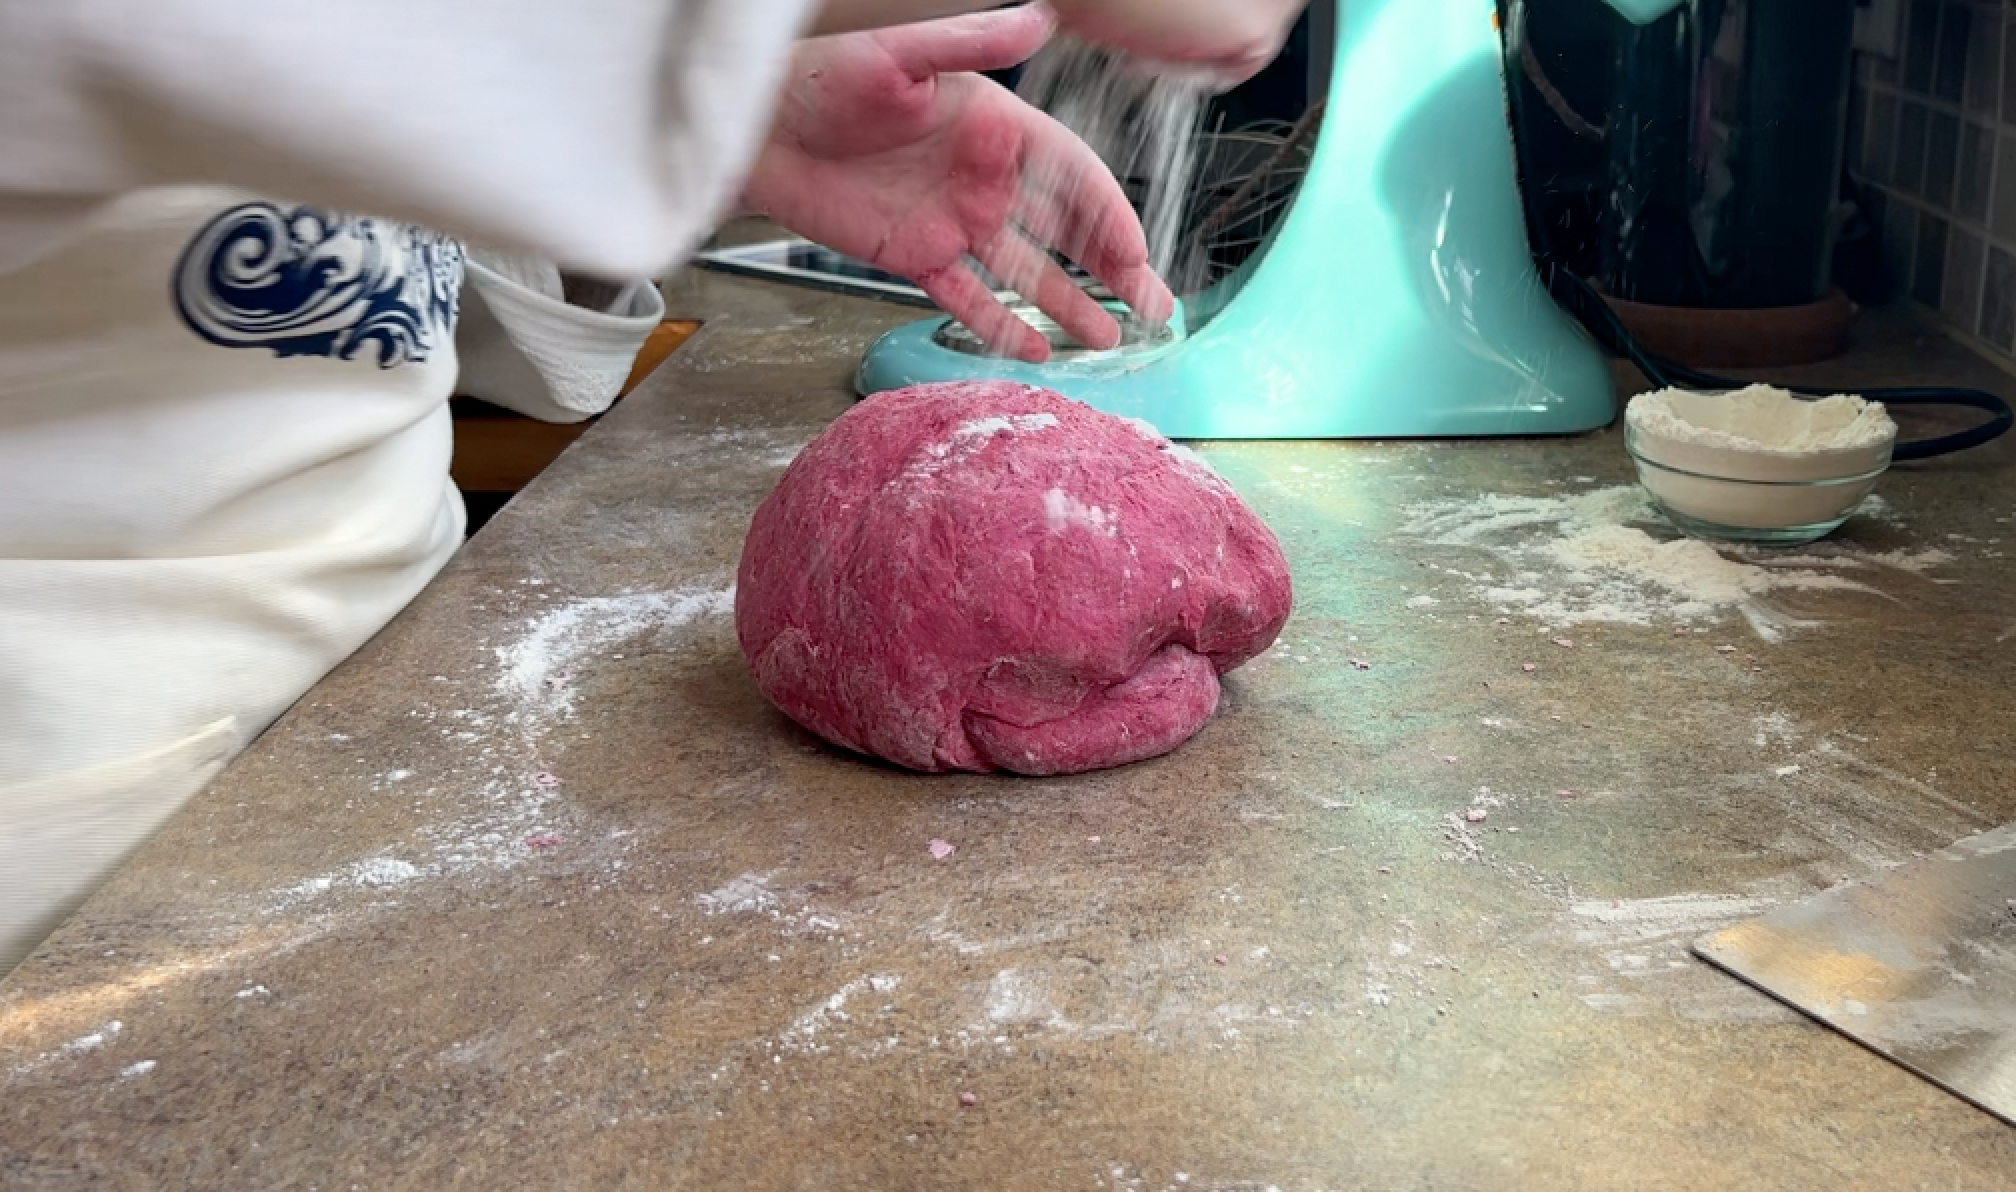 Dusting more flour into the pink dough